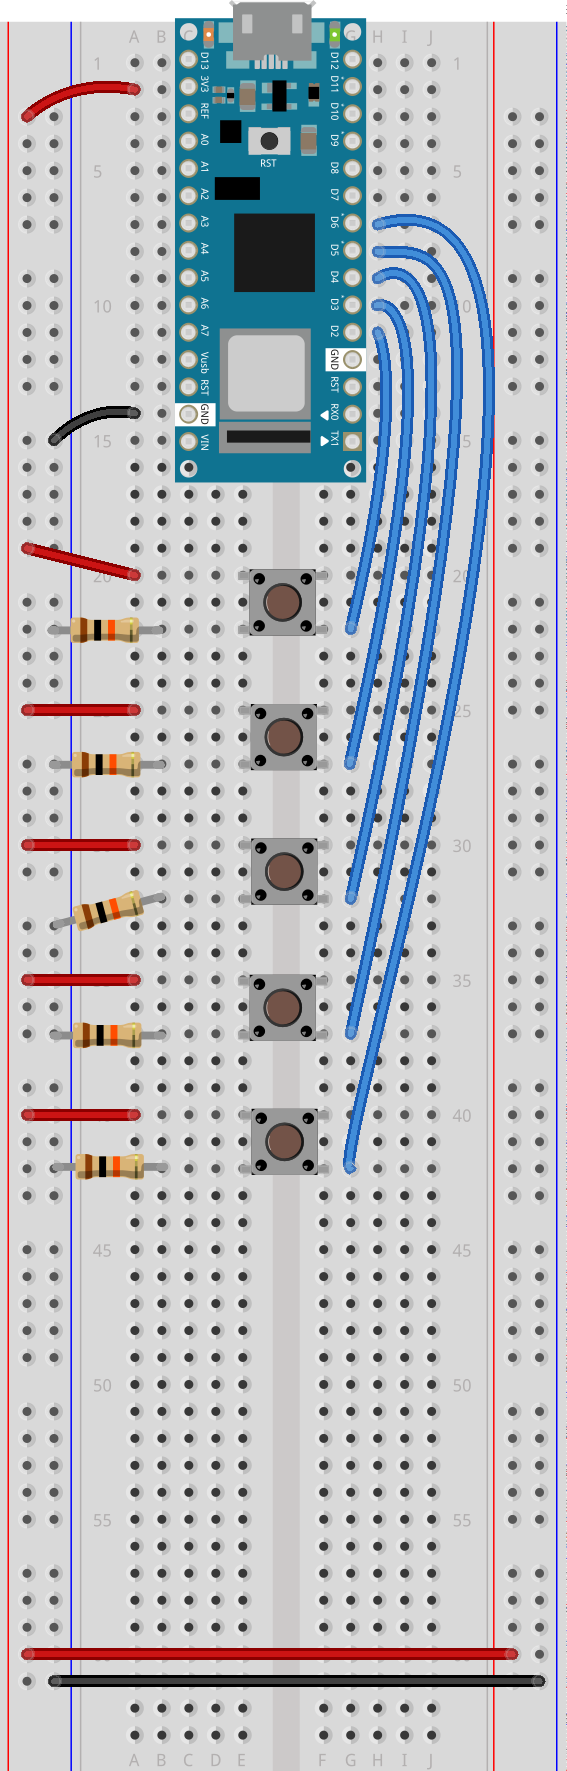 Breadboard drawing of an Arduino Nano connected to five pushbuttons. The pushbuttons straddle the center divide of the breadboard in rows 20-22, 25-27, 30-32, 35-37, and 40-42, respectively. 10-kilohm resistors connect the left side of each pushbutton to the breadboard's GND bus at rows 22, 27, 32, 37, 42. Blue wires connect the right side of each pushbutton at pins 22, 27, 32, 37, 42 to the arduino digital pins 2-6 respectively. Red wires connect the left side of each pushbutton to the voltage bus at rows 20, 25, 30, 35, 40